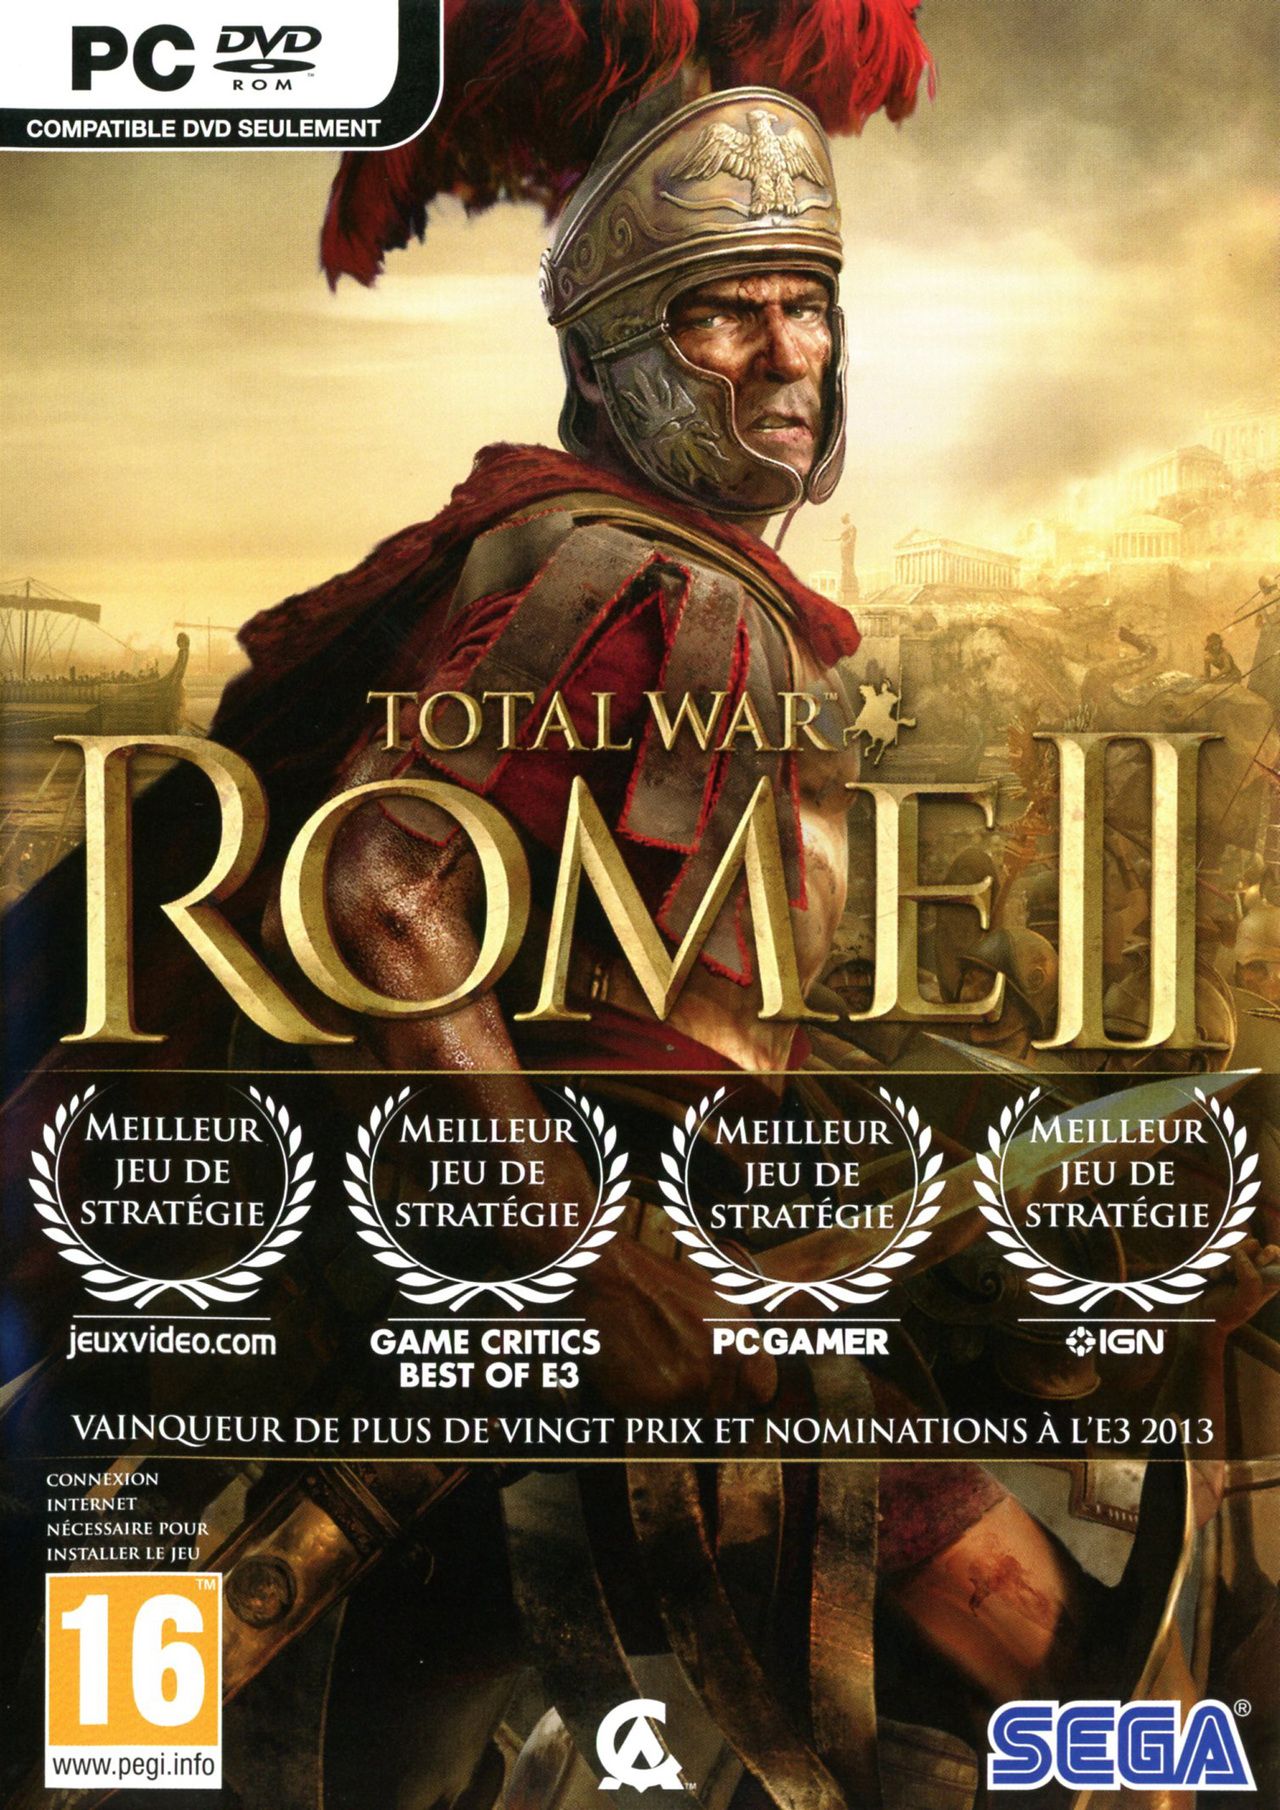 iphone xs max total war rome 2 images